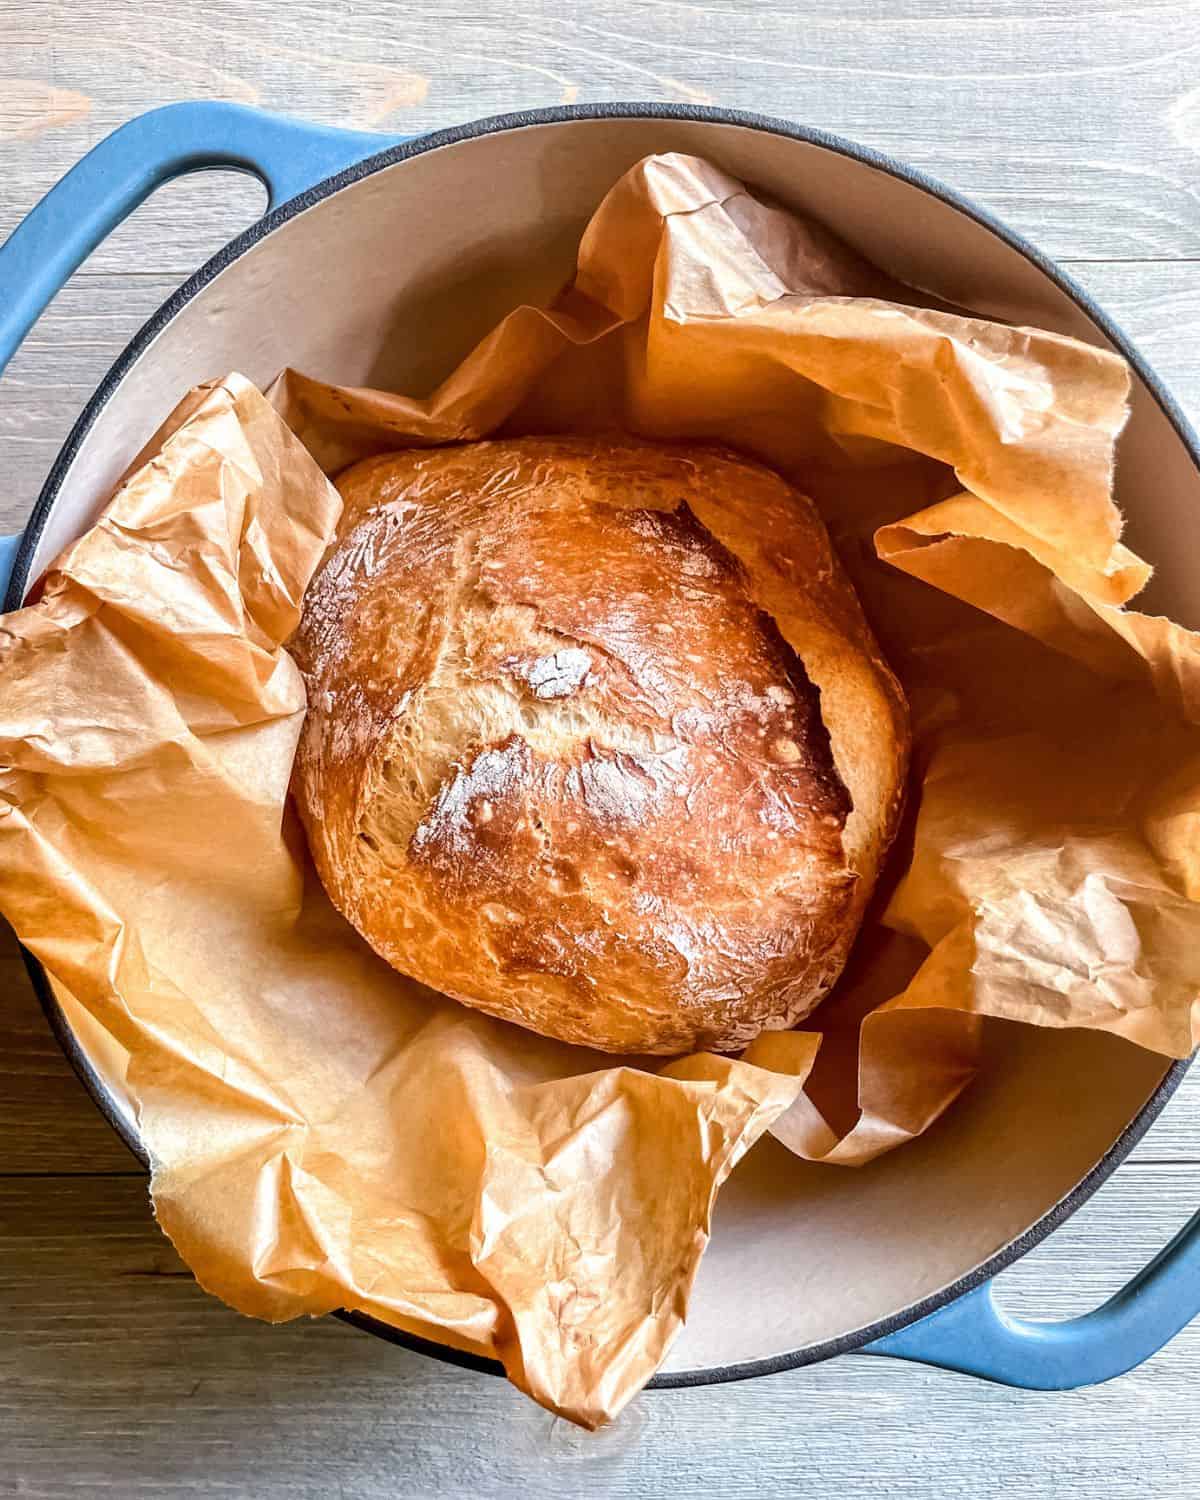 Cooked Dutch Oven Bread in parchment paper, in a blue Dutch Oven.